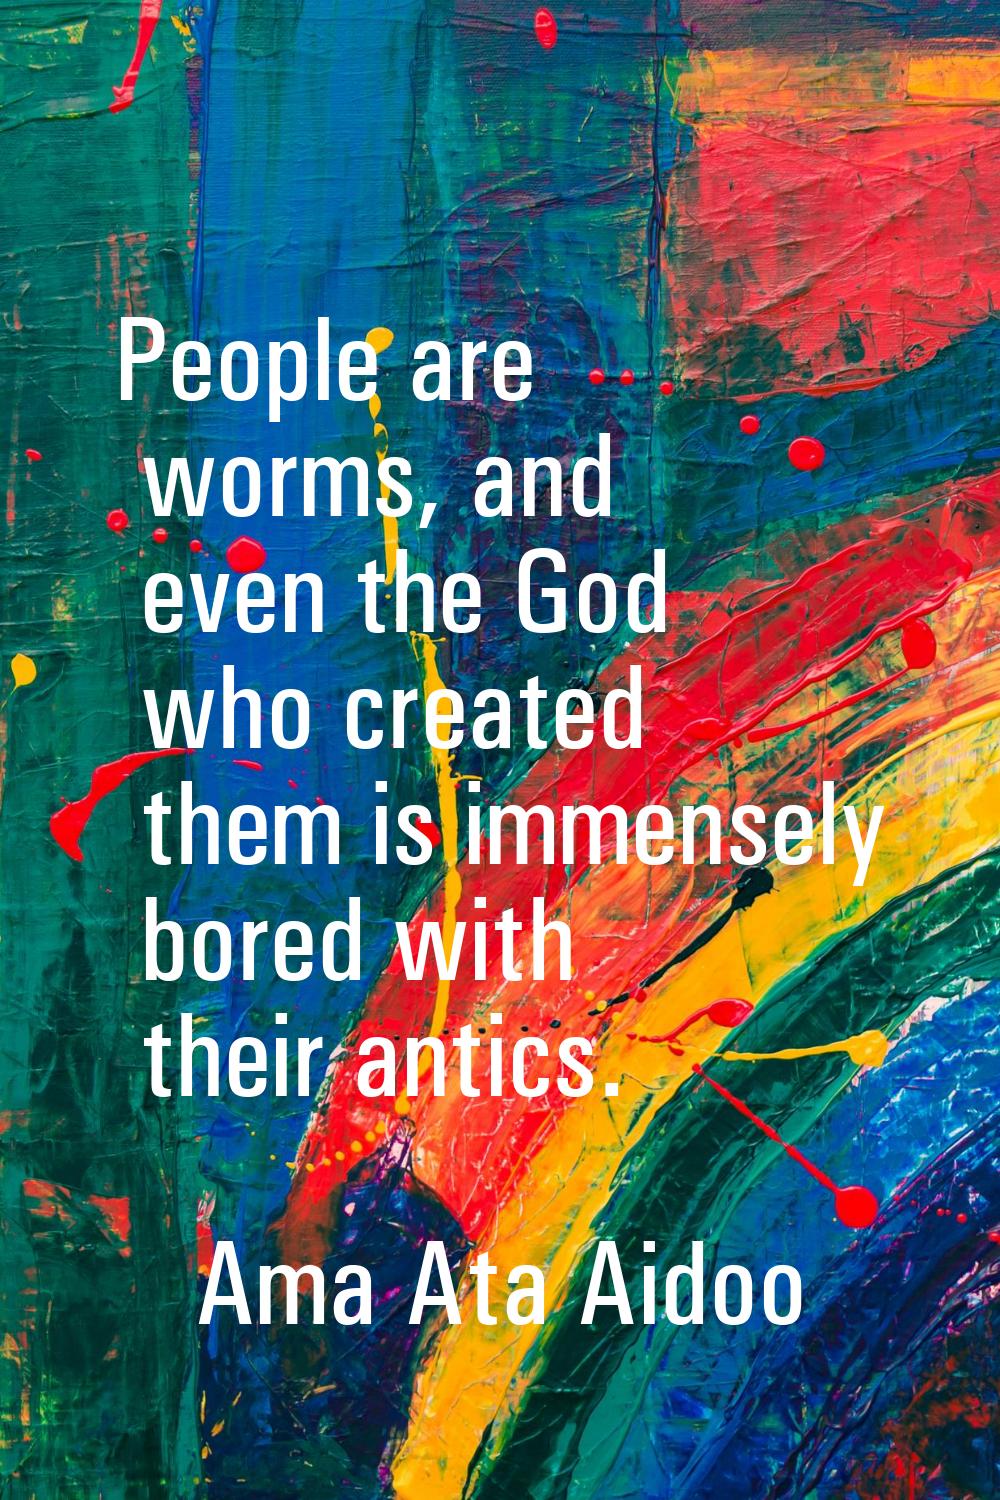 People are worms, and even the God who created them is immensely bored with their antics.